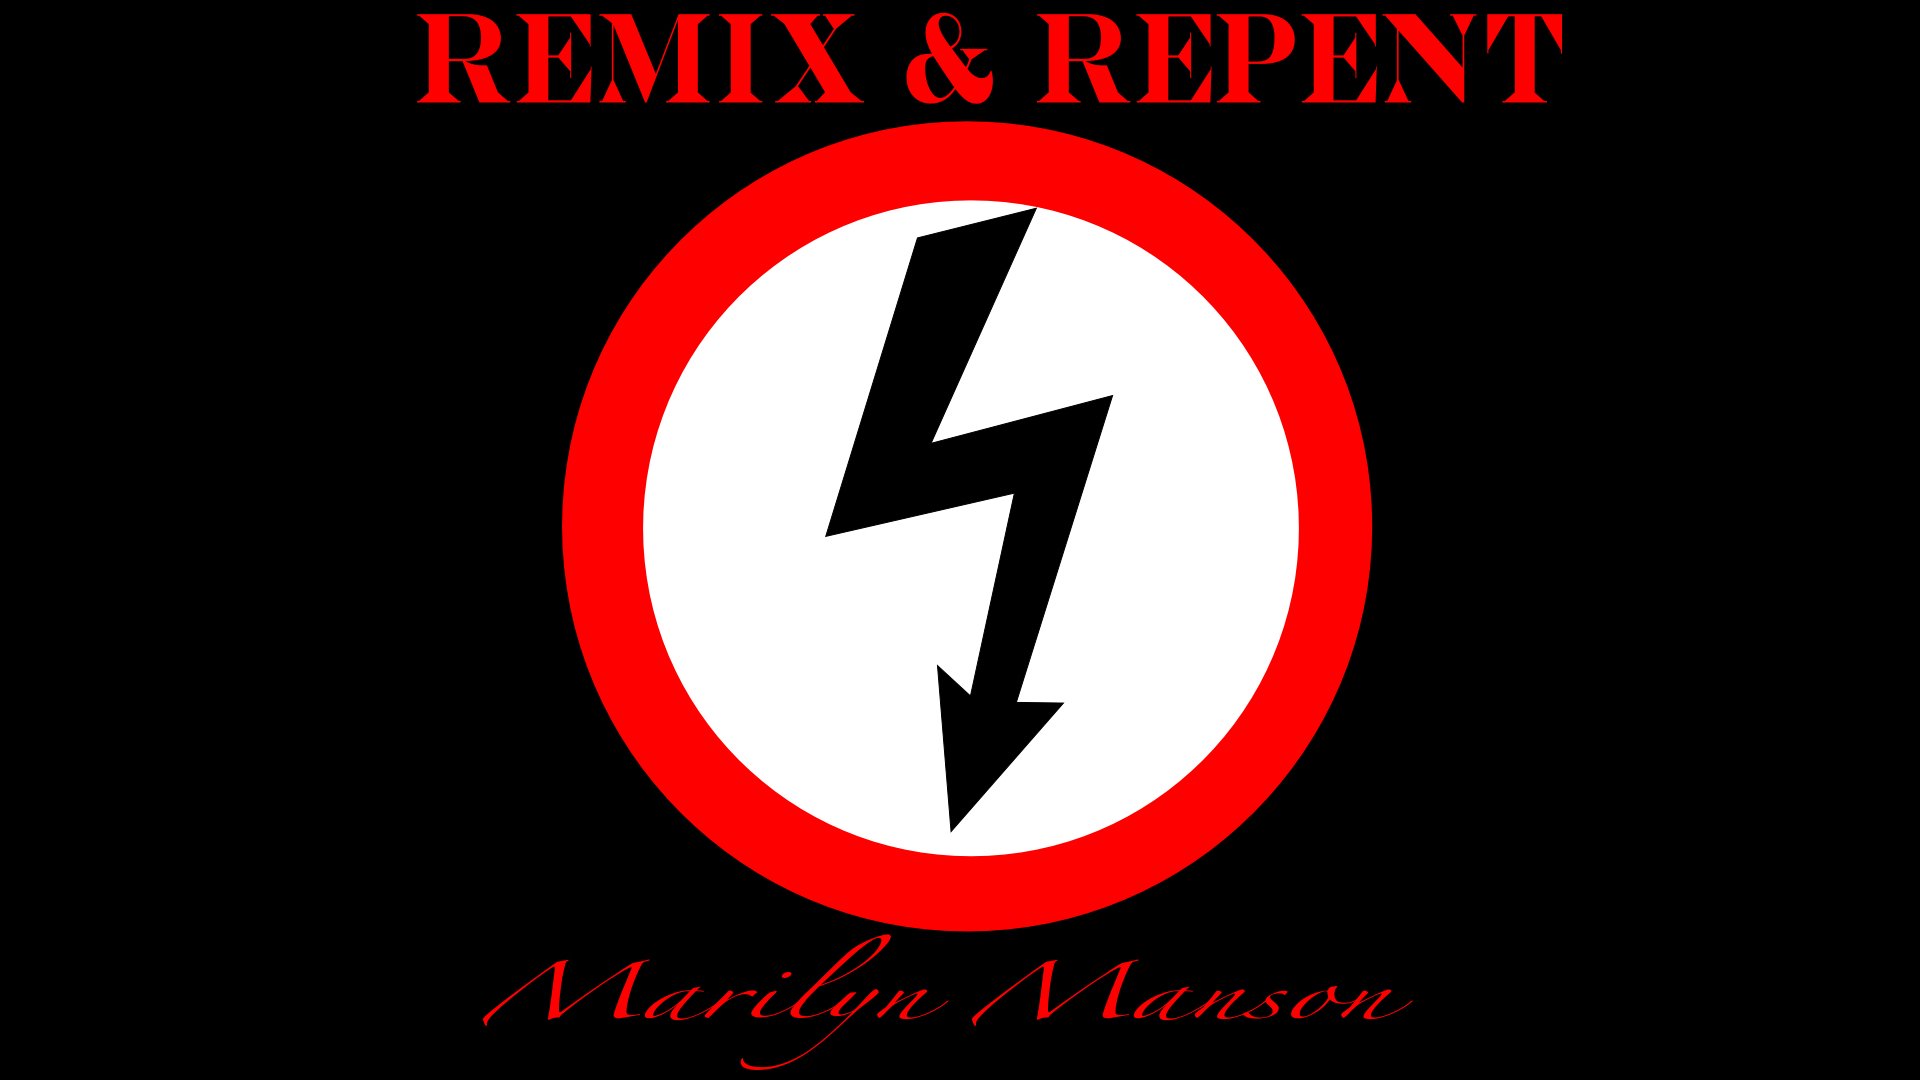 Marilyn Manson - Marilyn Manson Remix And Repent , HD Wallpaper & Backgrounds